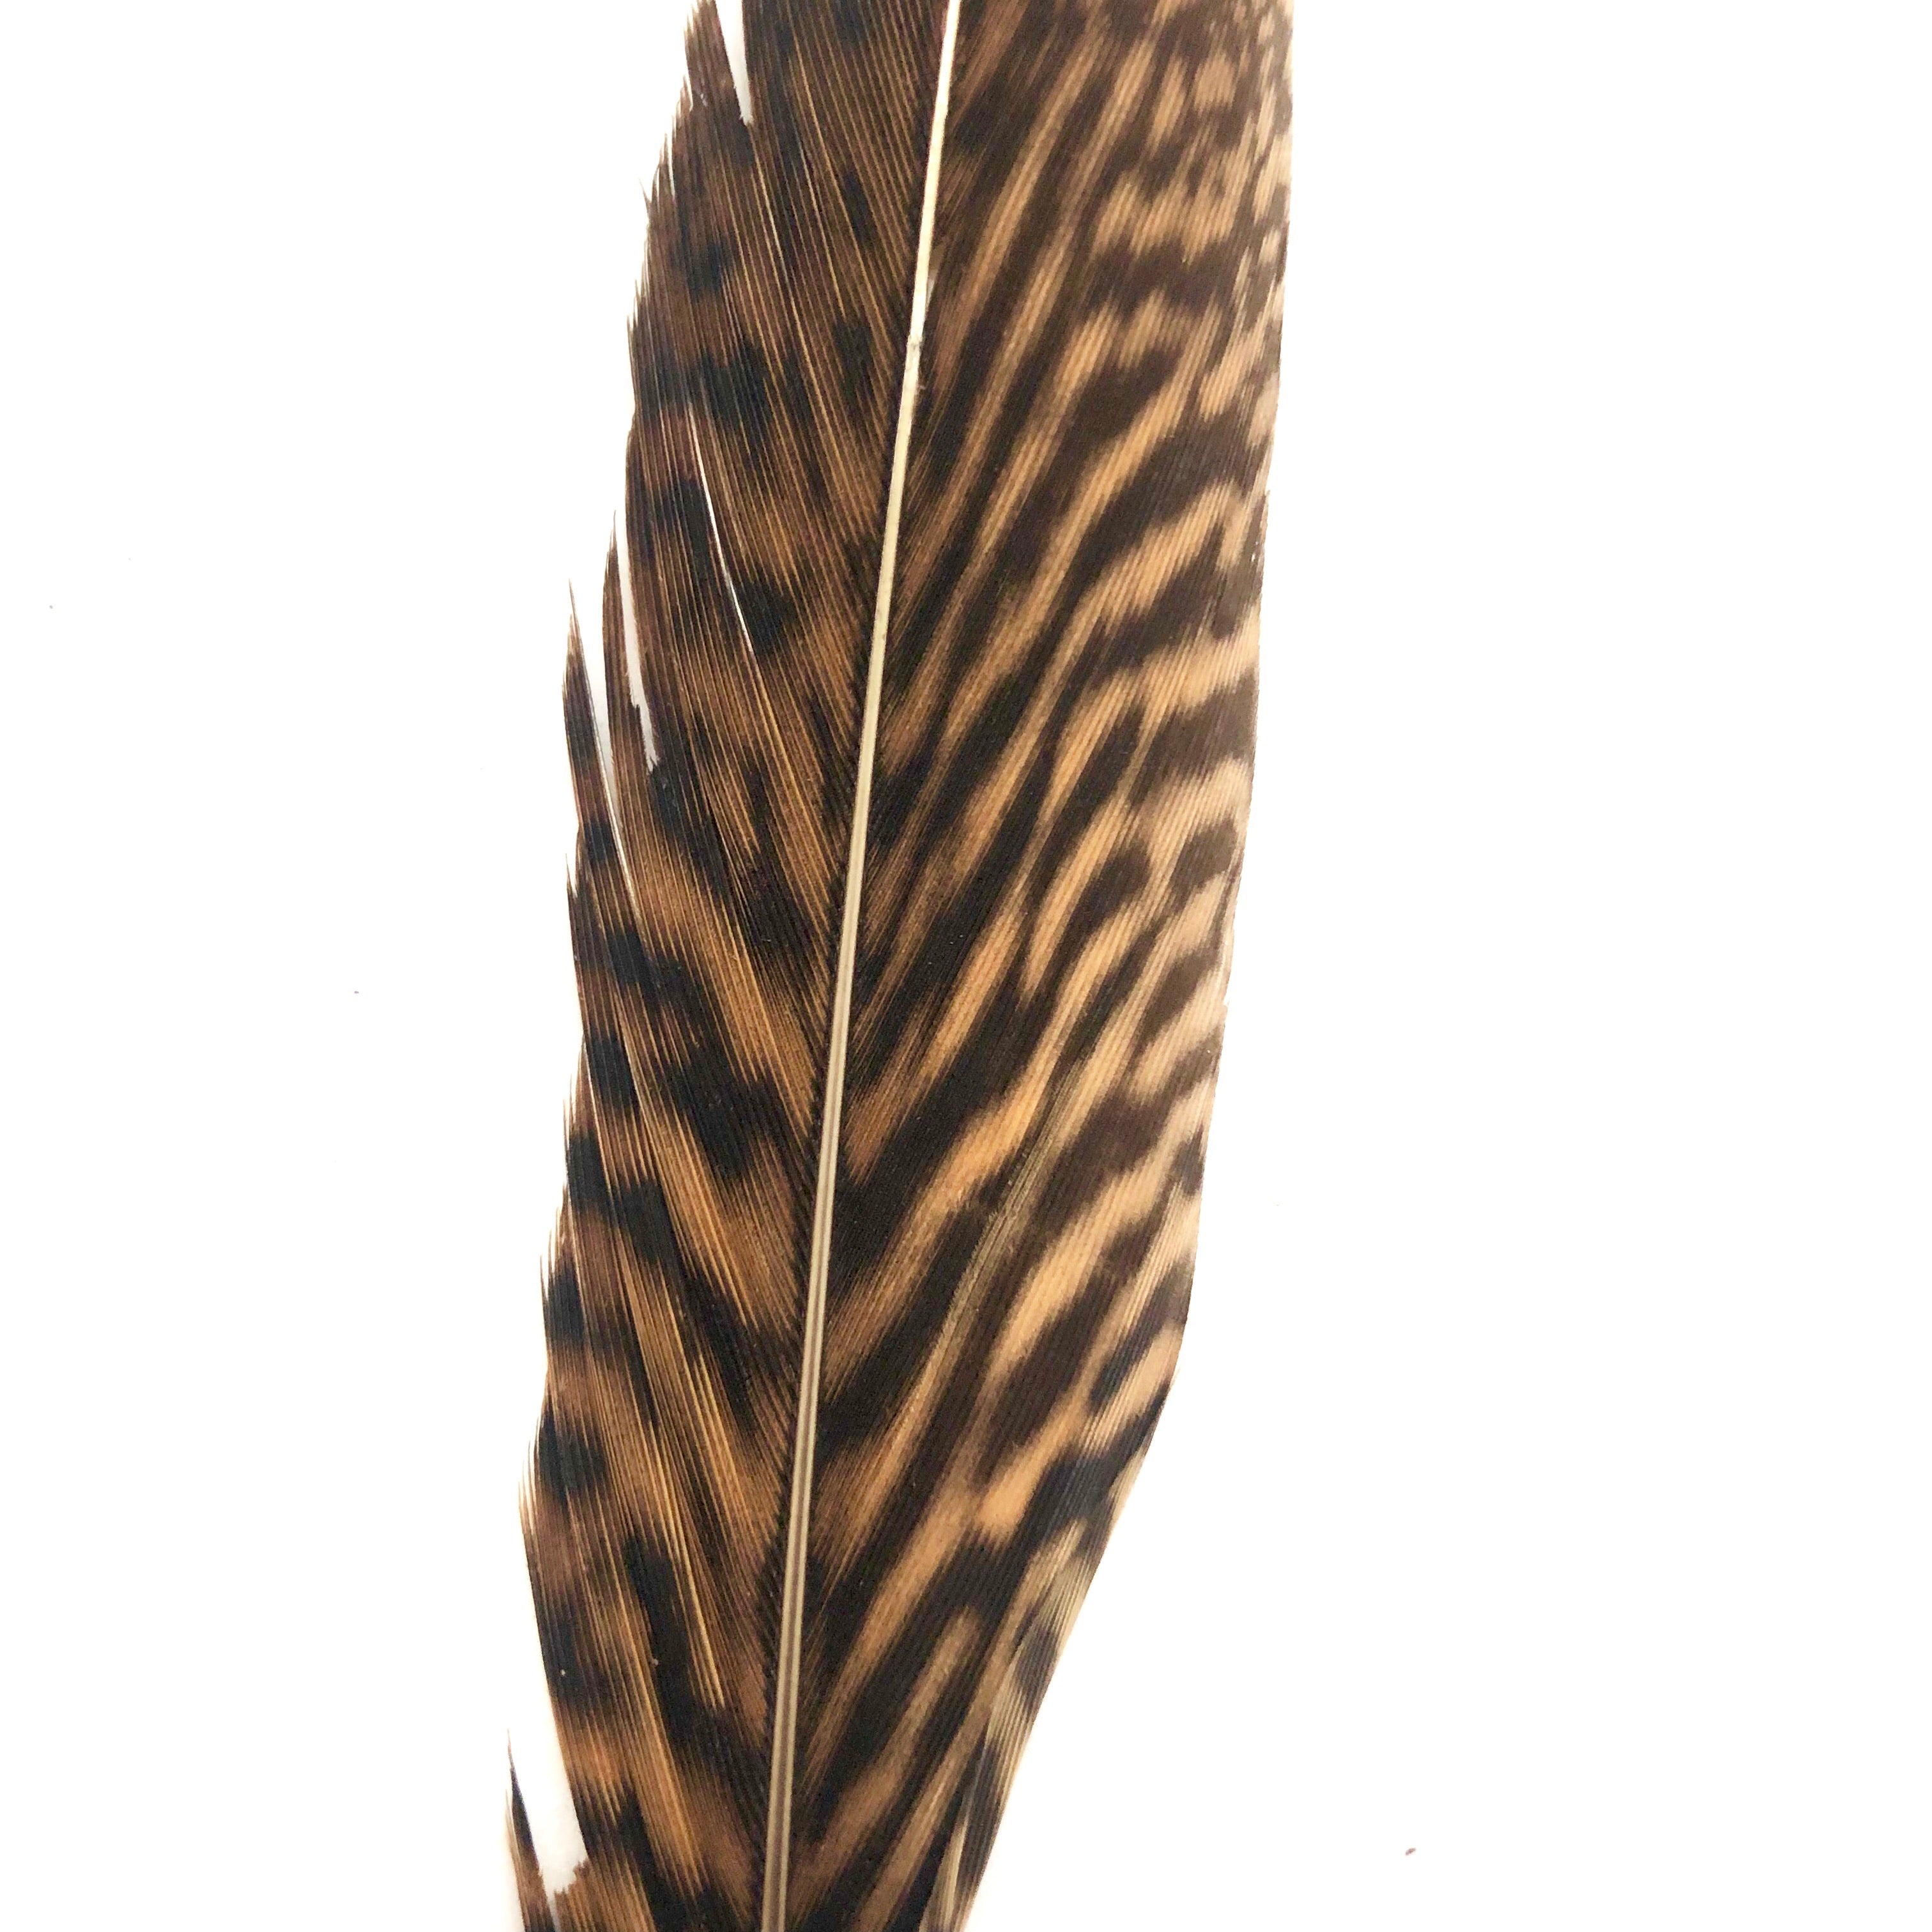 6" to 10" Golden Pheasant Side Tail Feather x 10 pcs - Natural